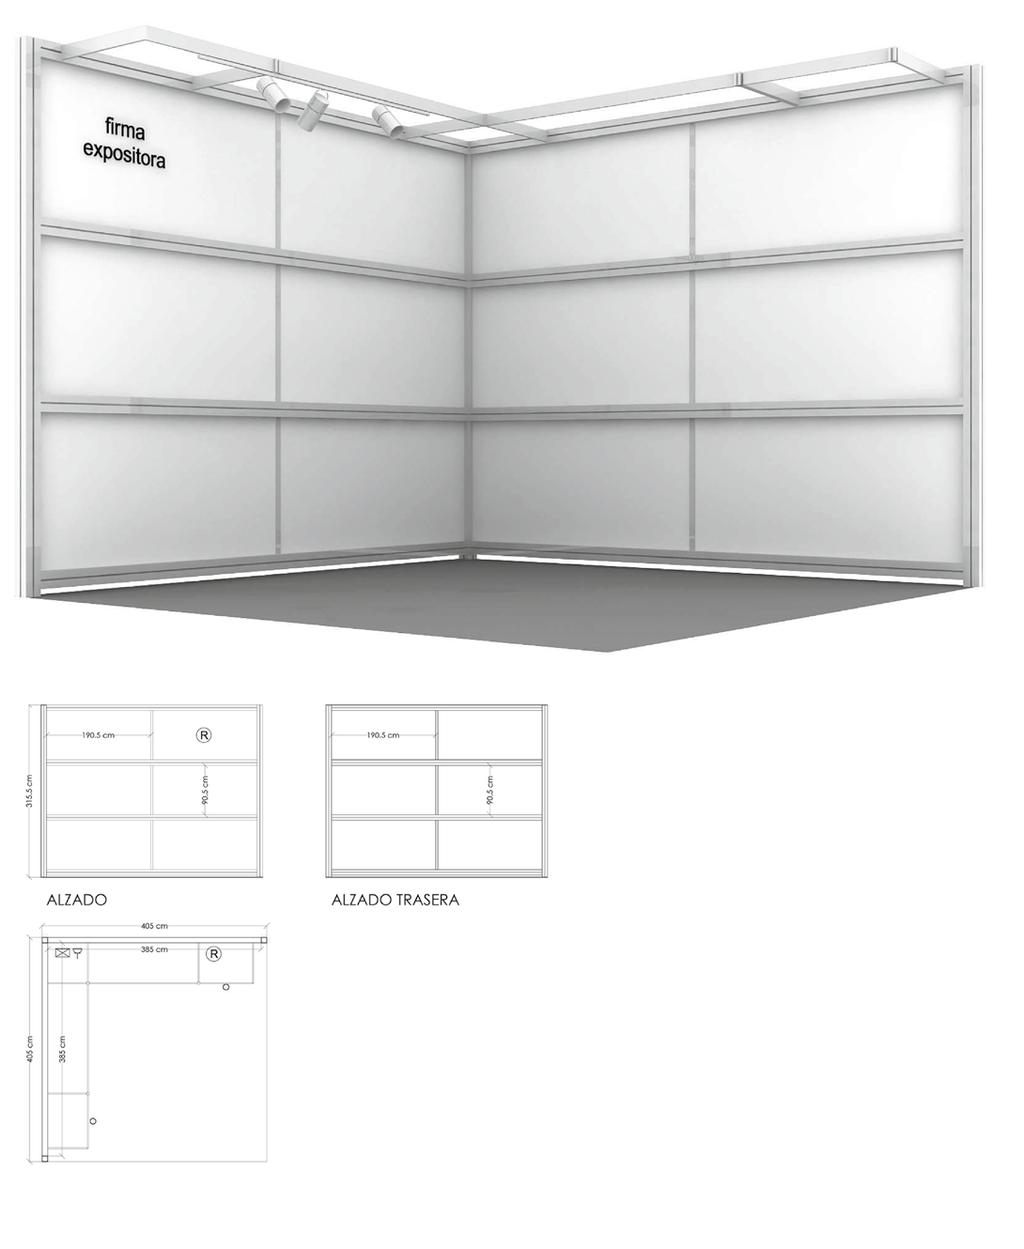 DECORATION OPTIONS 1. BASIC DECORATION 25 /sq.m. + VAT Features: Wall sign with the exhibitor company s name. Grey Anthracite carpet. White melamine partition wall, open on aisles.